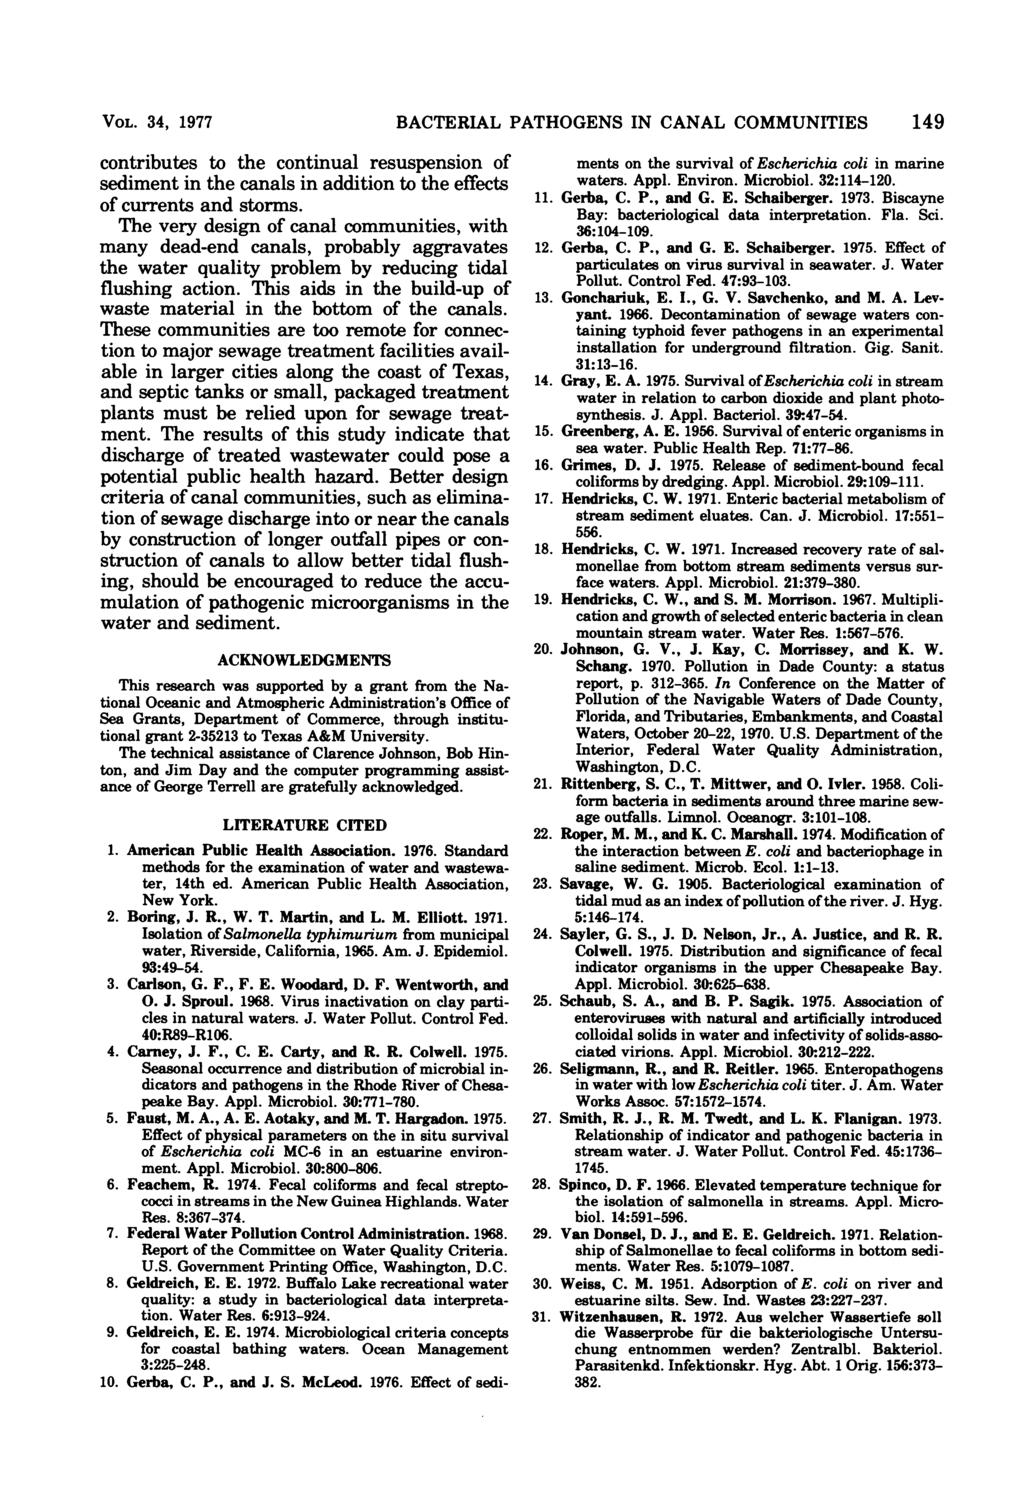 VOL. 34, 1977 contributes to the continul resuspension of sediment in the cnls in ddition to the effects of currents nd storms.